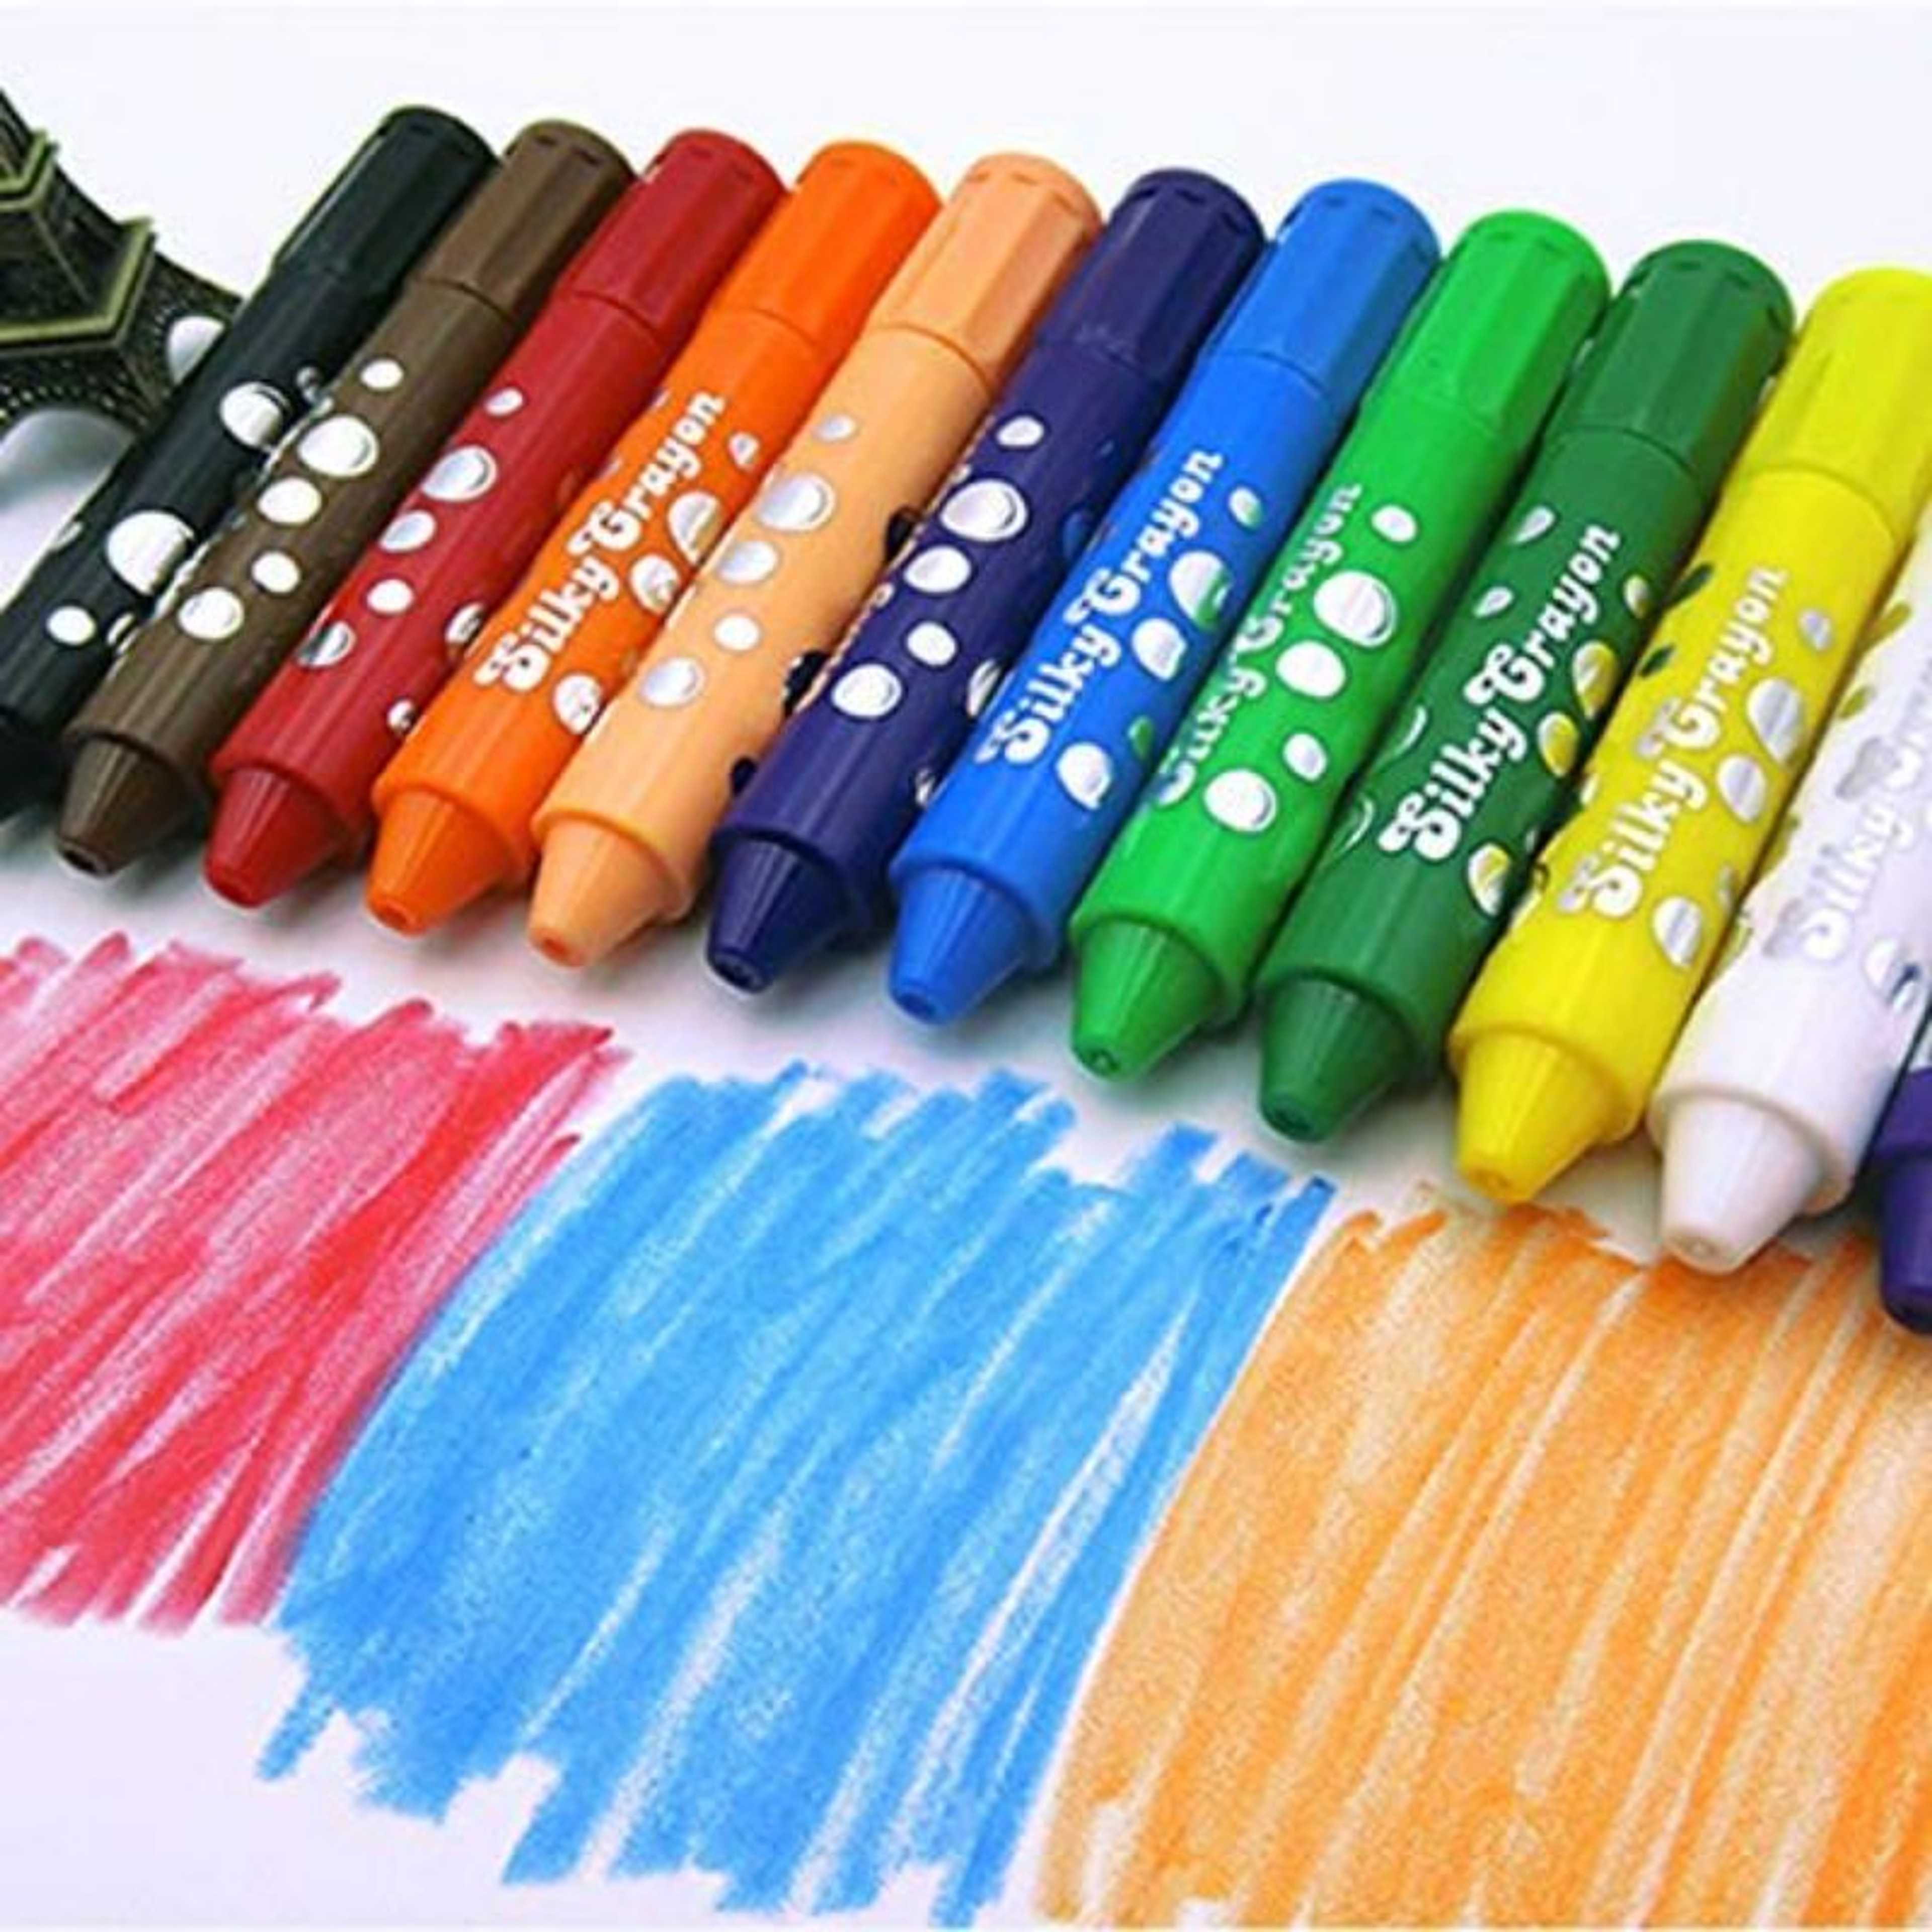 12 Colors Silky Crayons Set, Non Toxic Washable Rotating Silk Crayons Body Paint Large Water Soluble Blend-able Painting Stick Graffiti Safe for Baby, Kids and Children